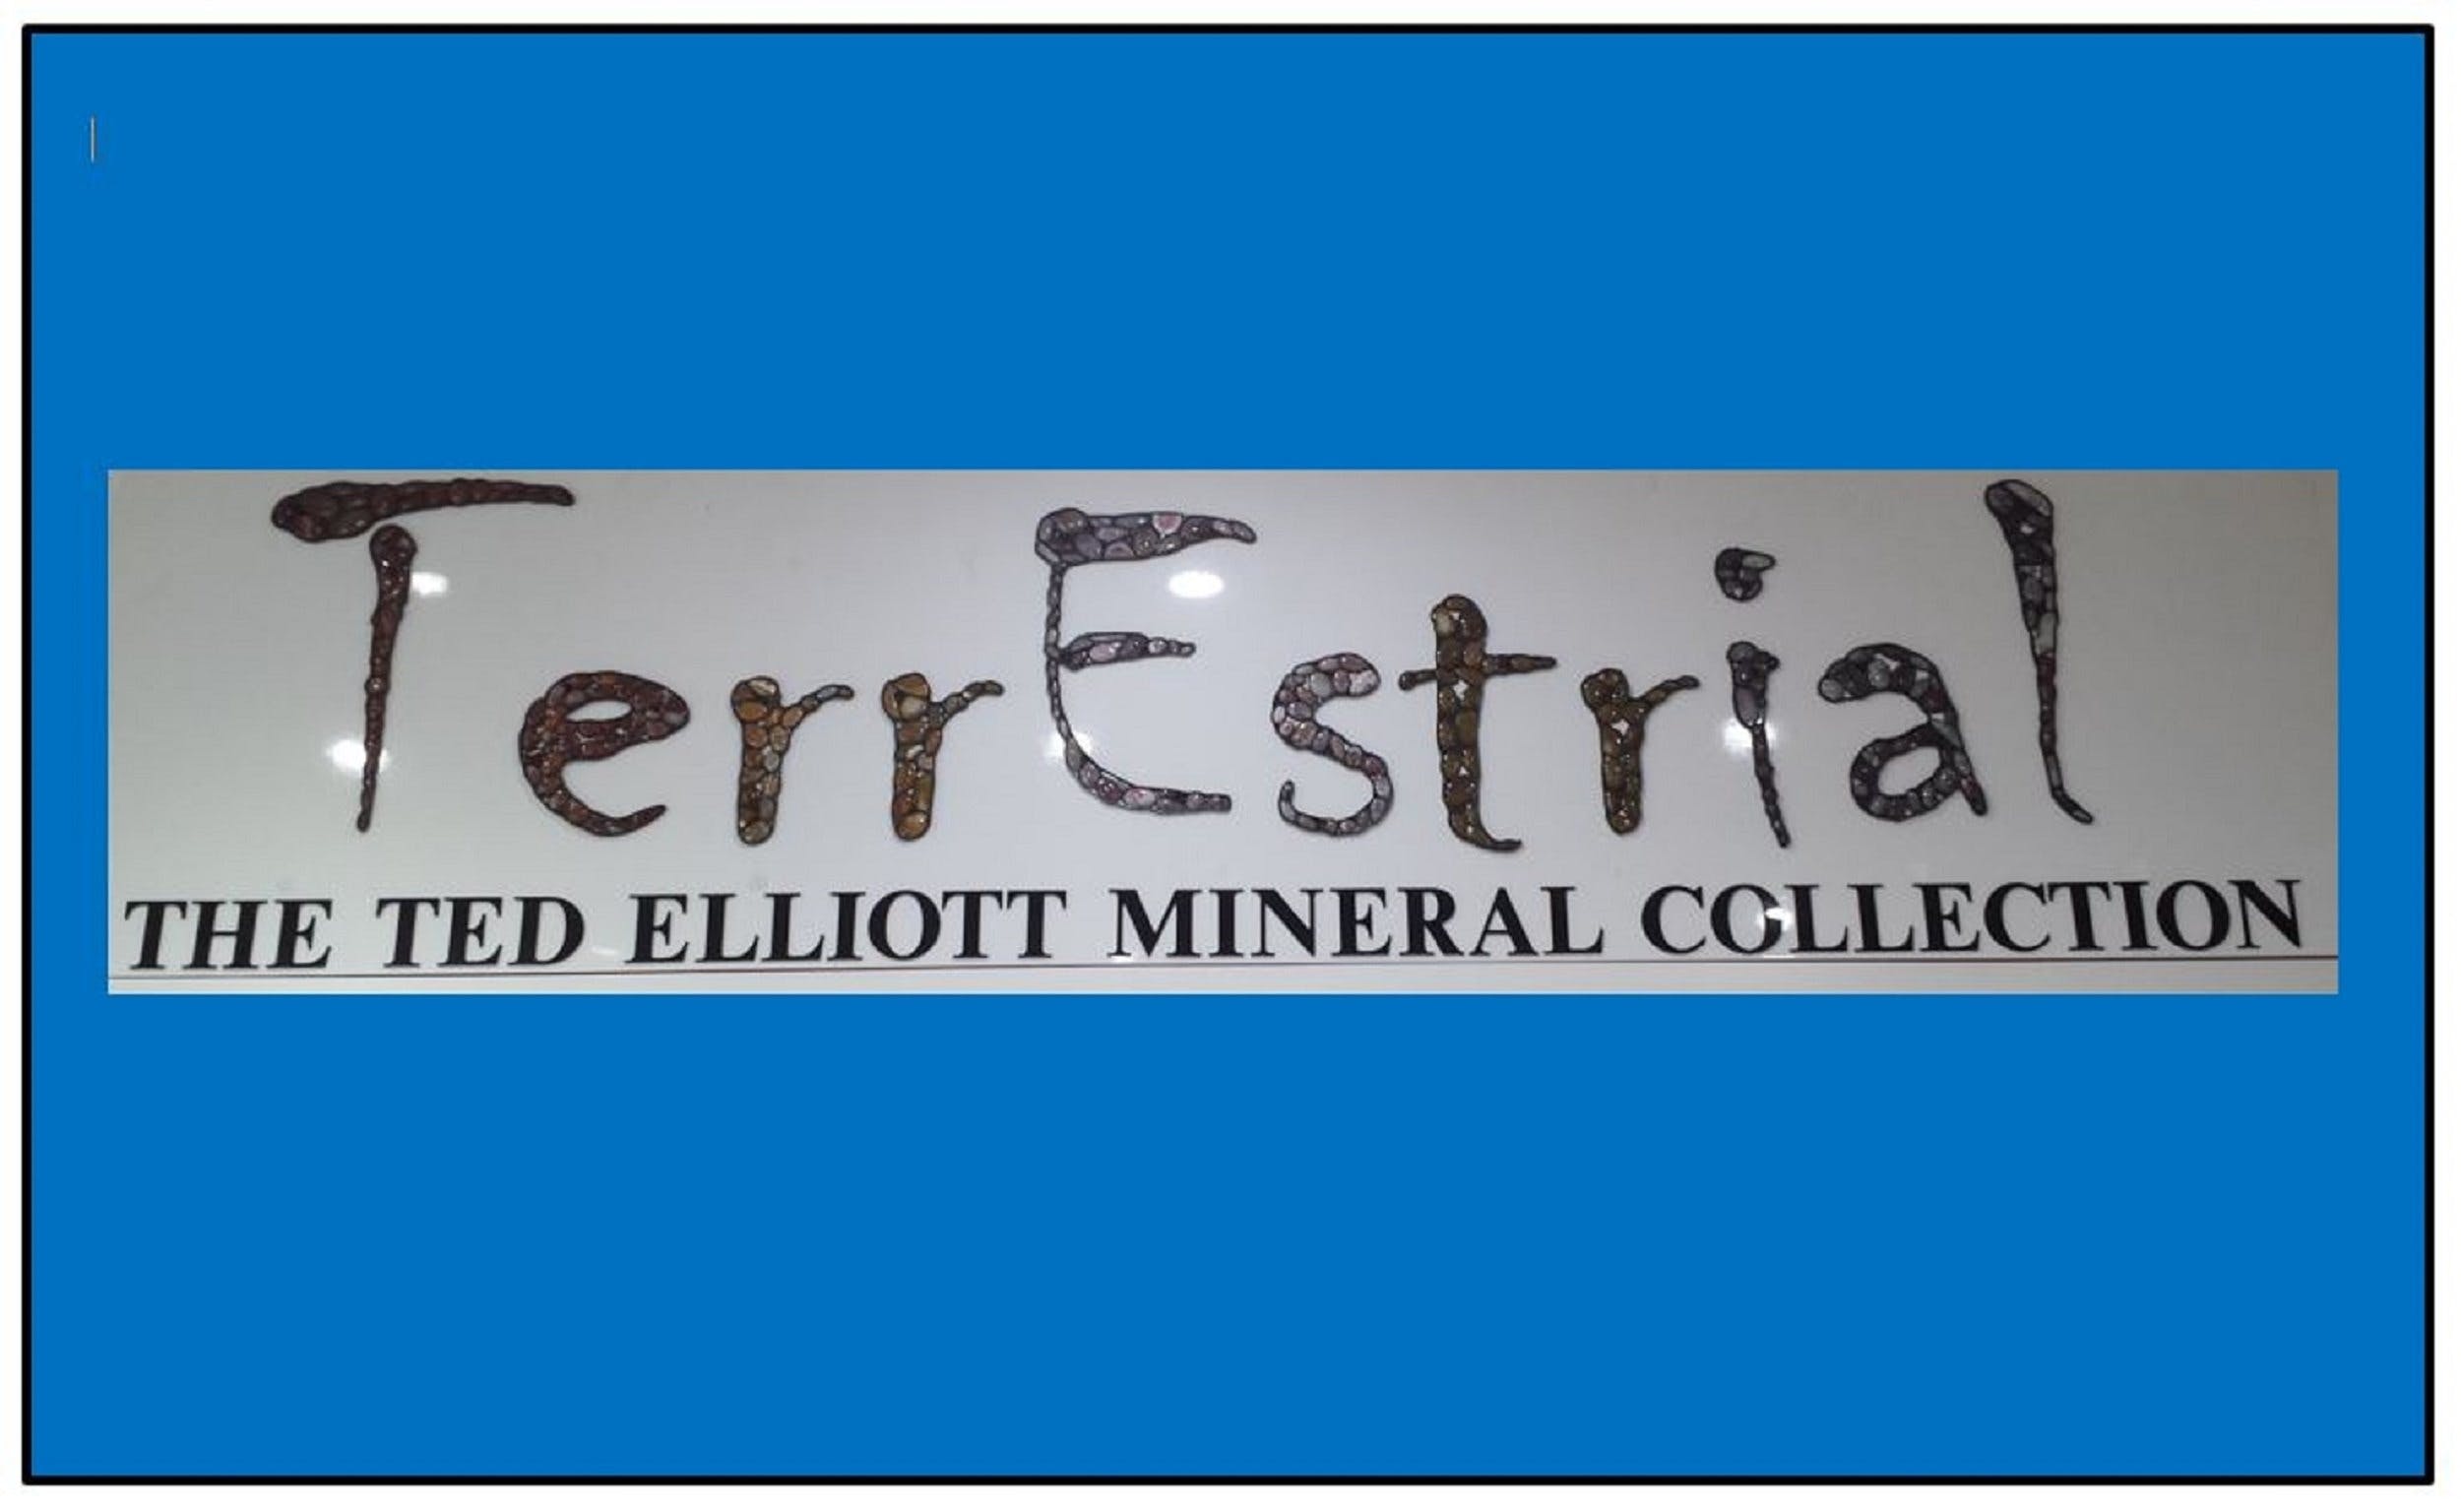 The Ted Elliott Mineral Collection - Nambucca Heads Accommodation